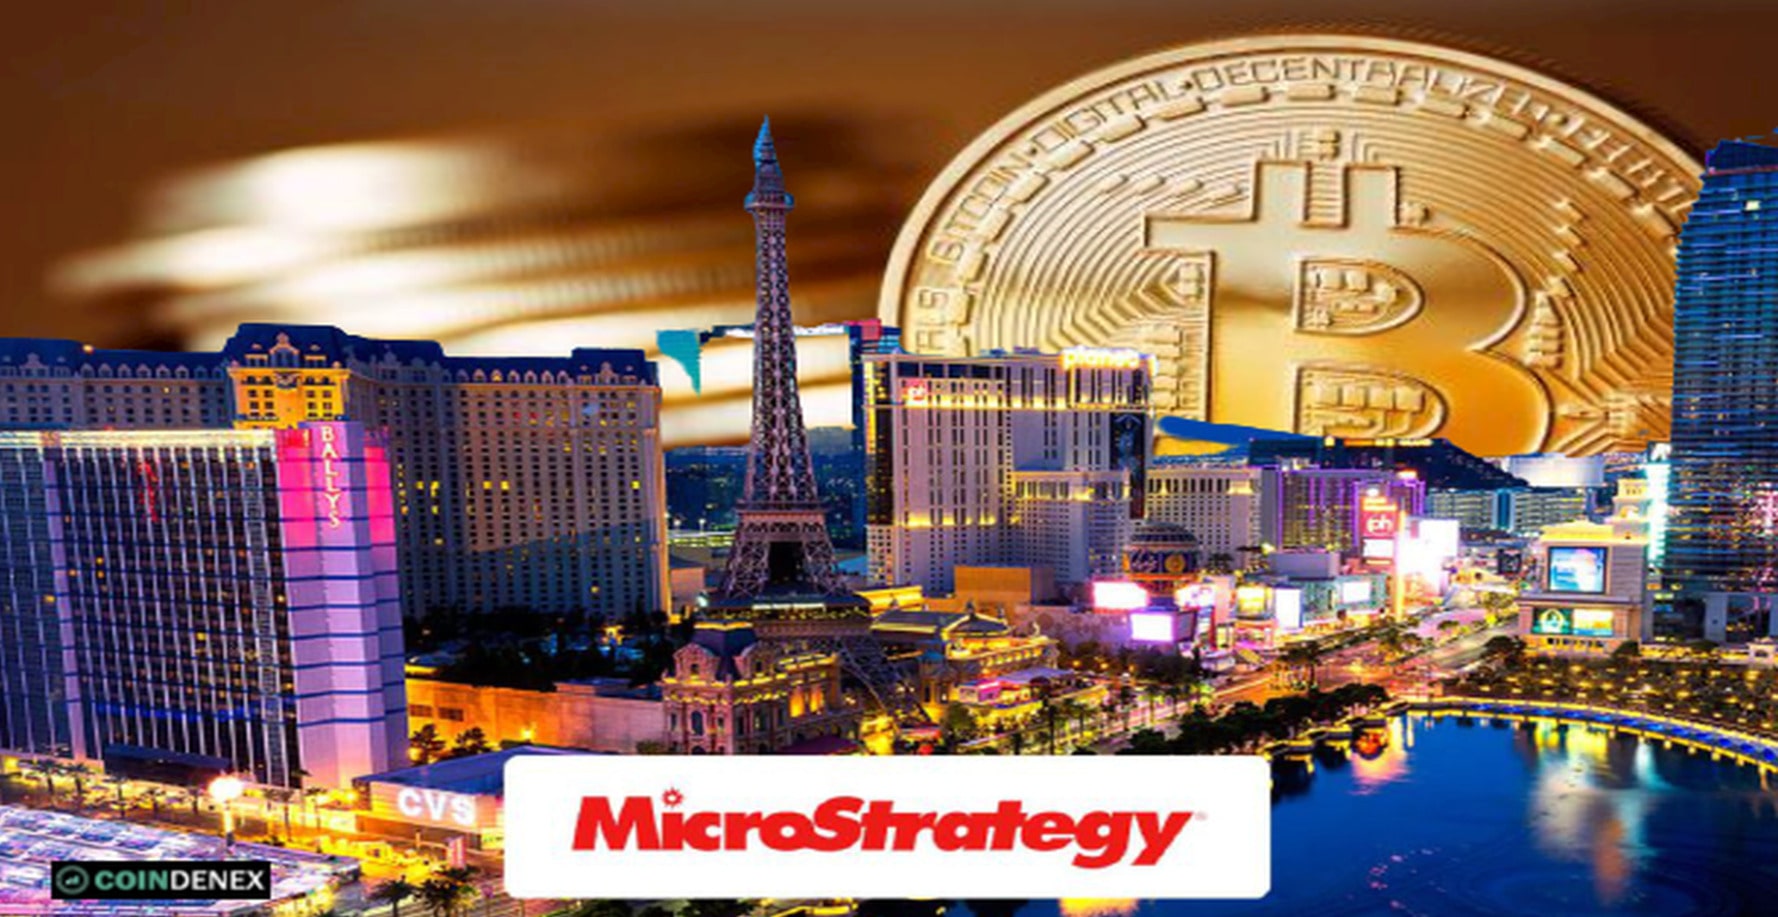 Microstrategy buys $ 10 million worth of Bitcoin